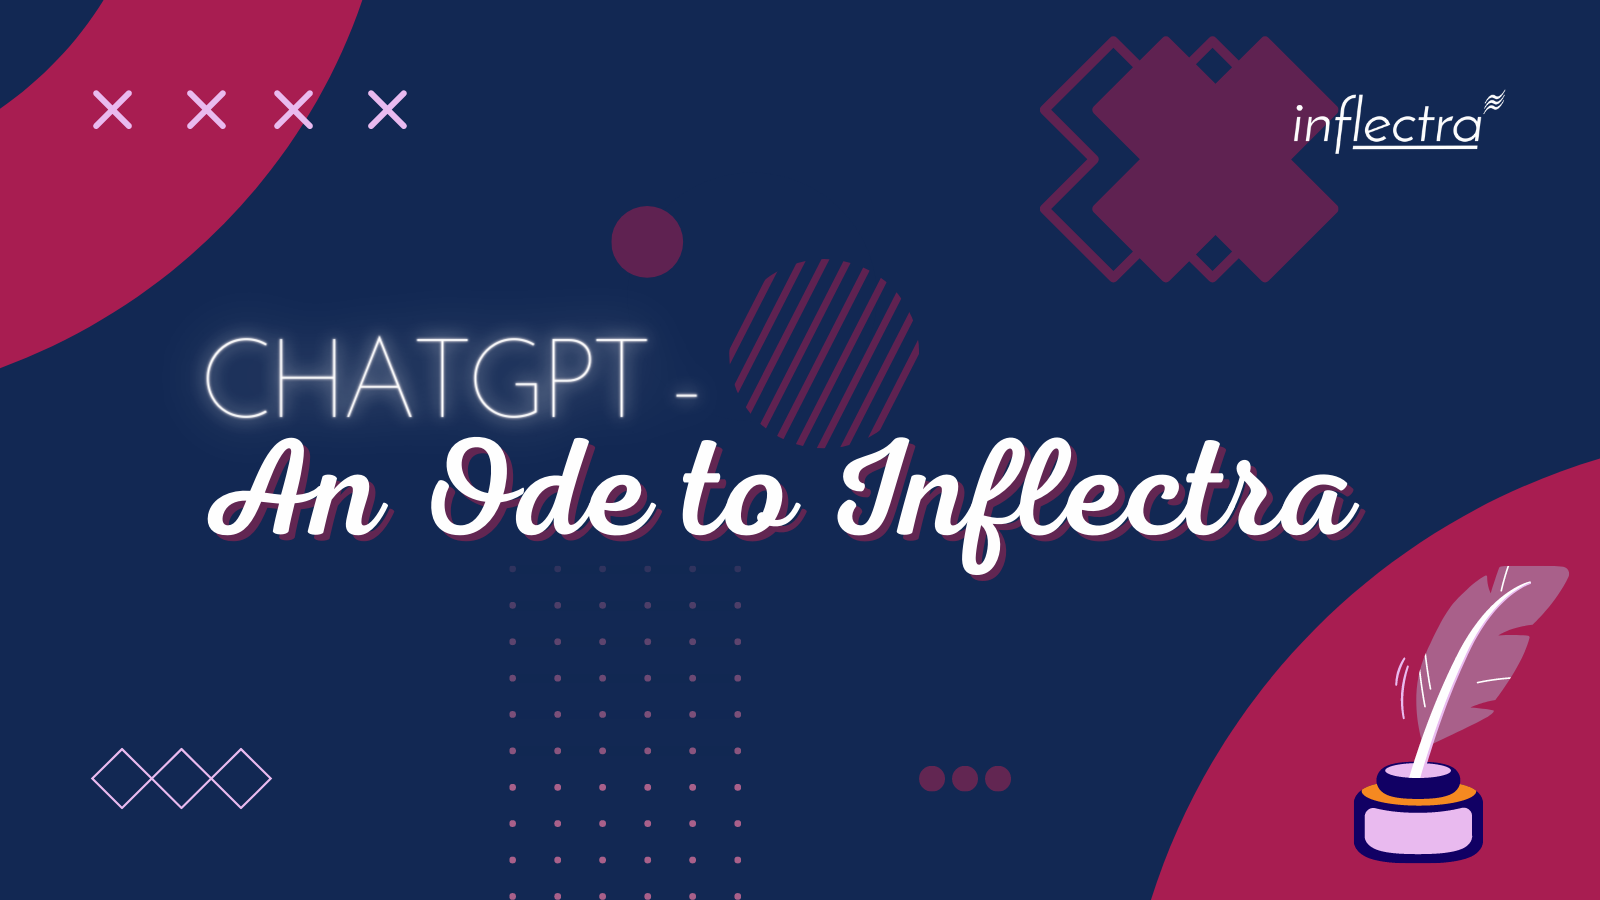 chat-gpt-an-ode-to-inflectra-image